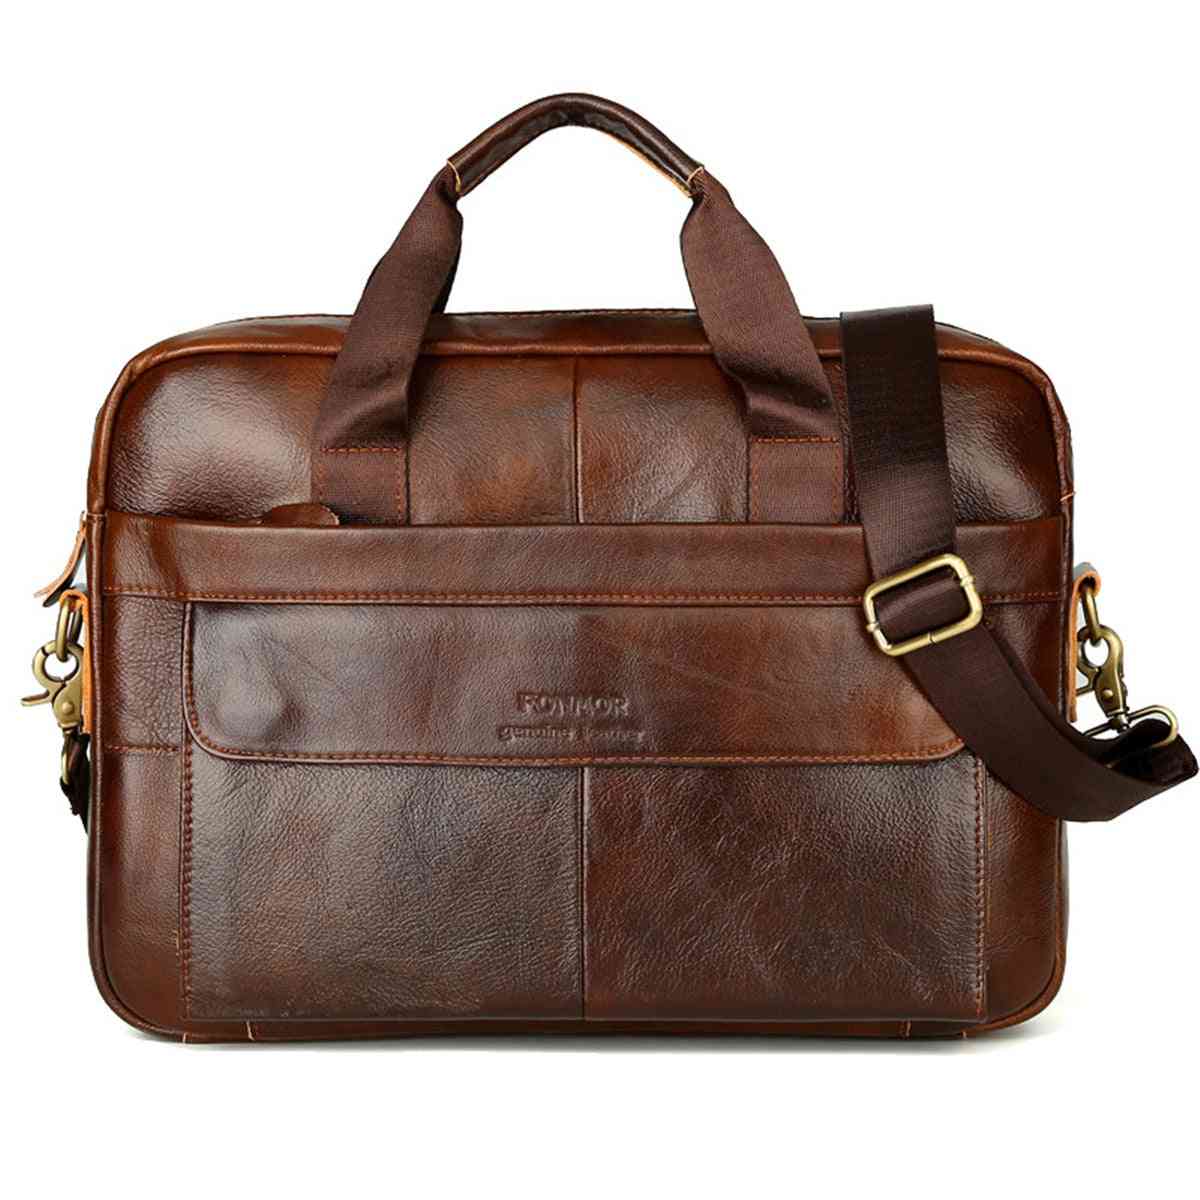 Men's Briefcase, Cowhide Leather, Crossbody Bags